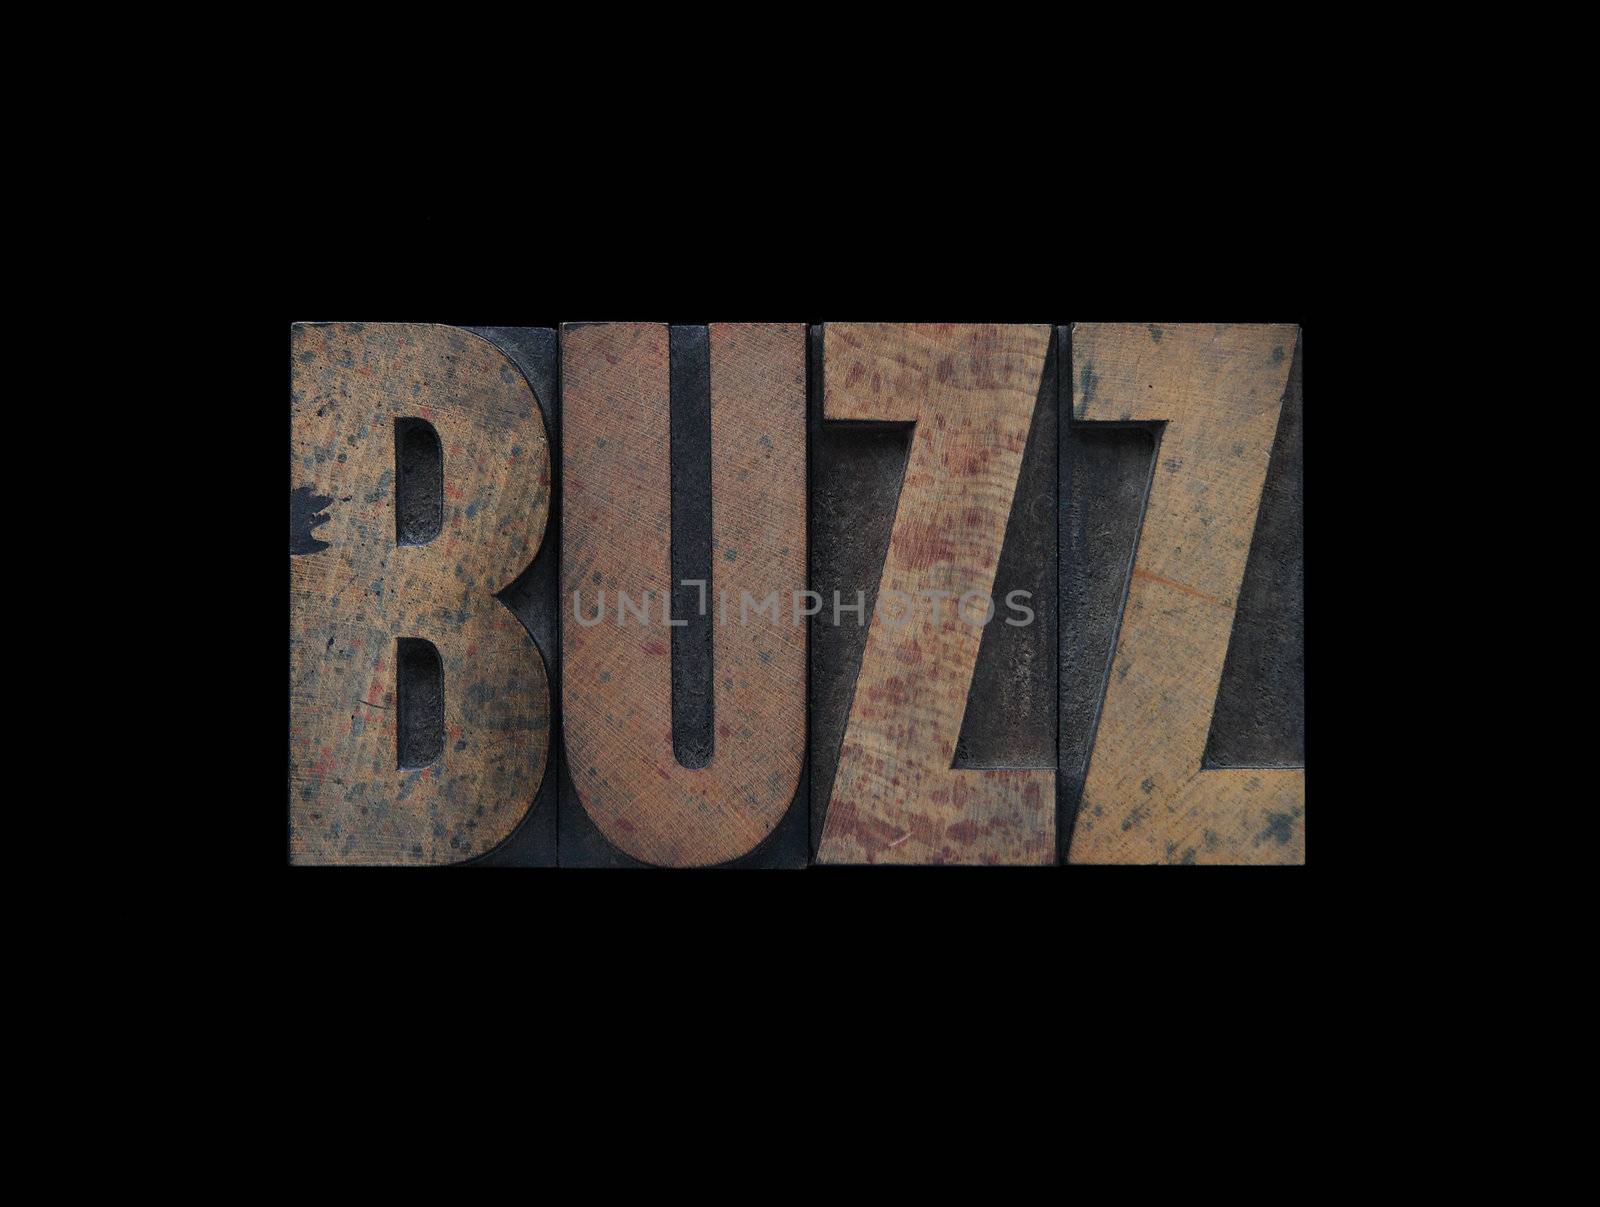 the word buzz in old wood type